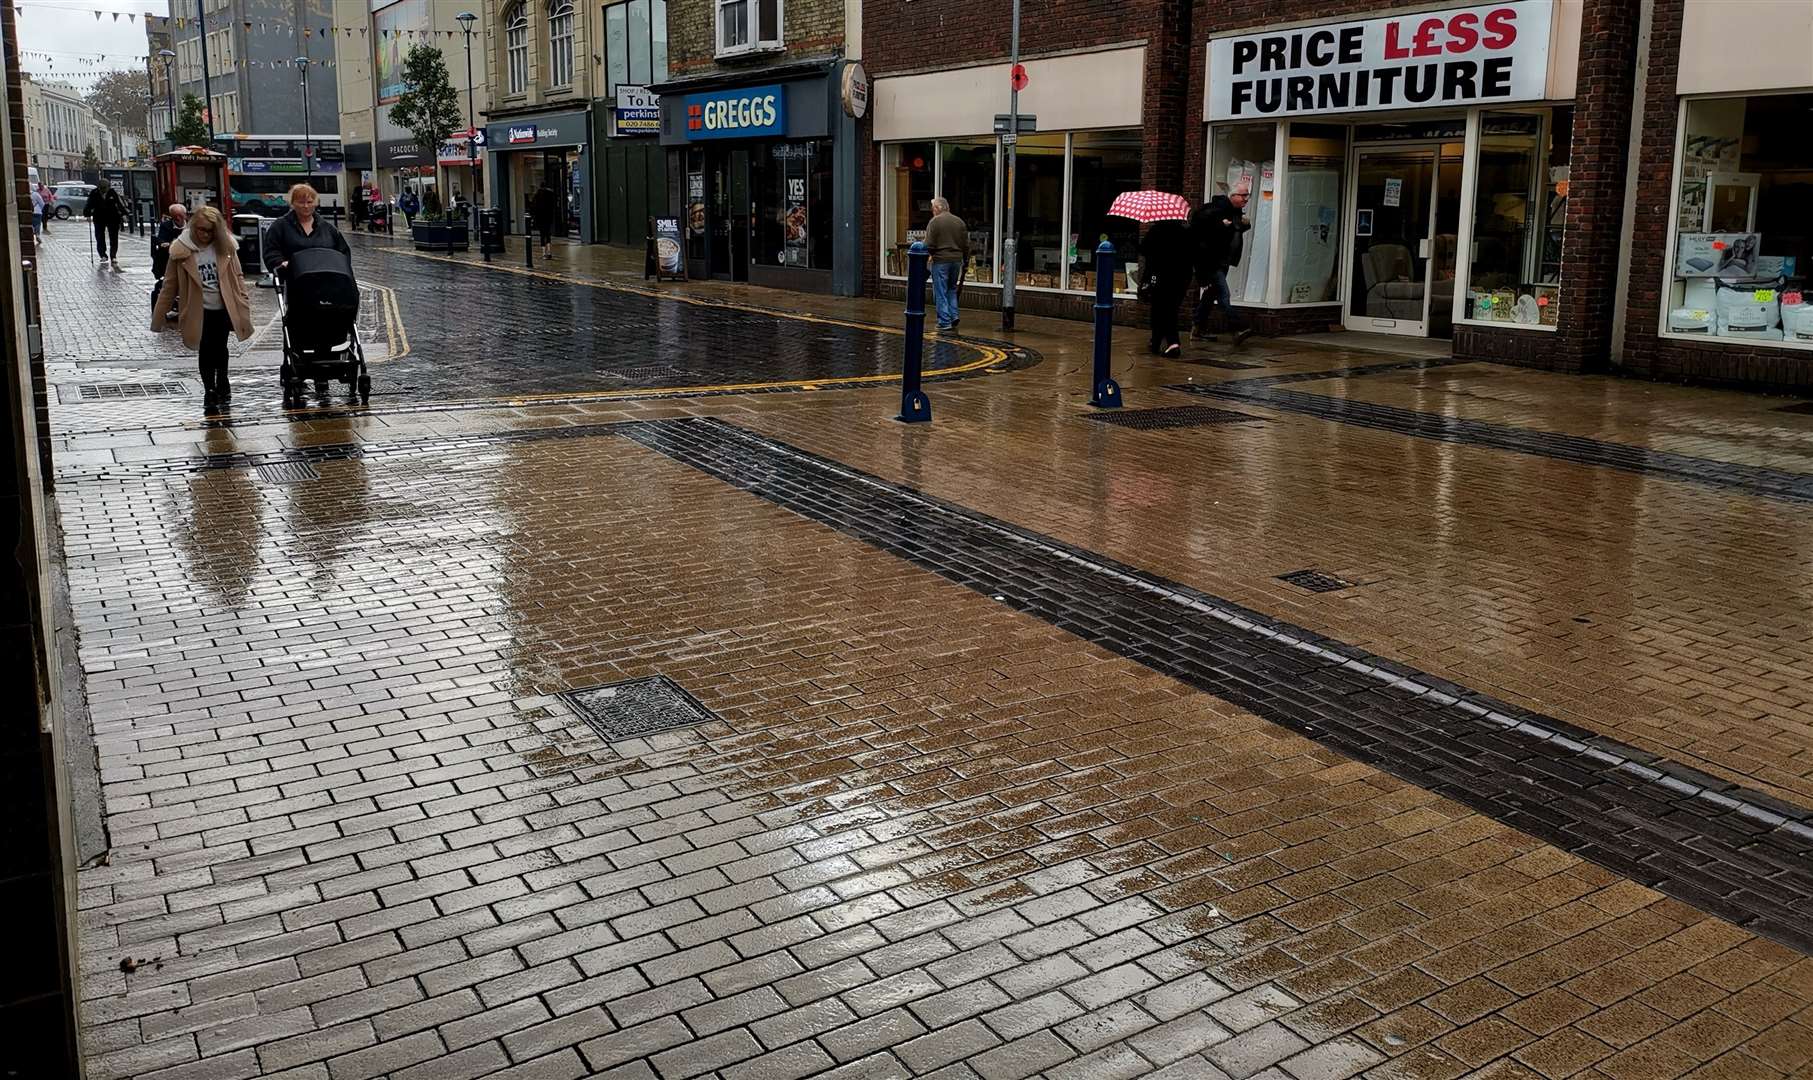 People rushed from shop to shop in the poor weather